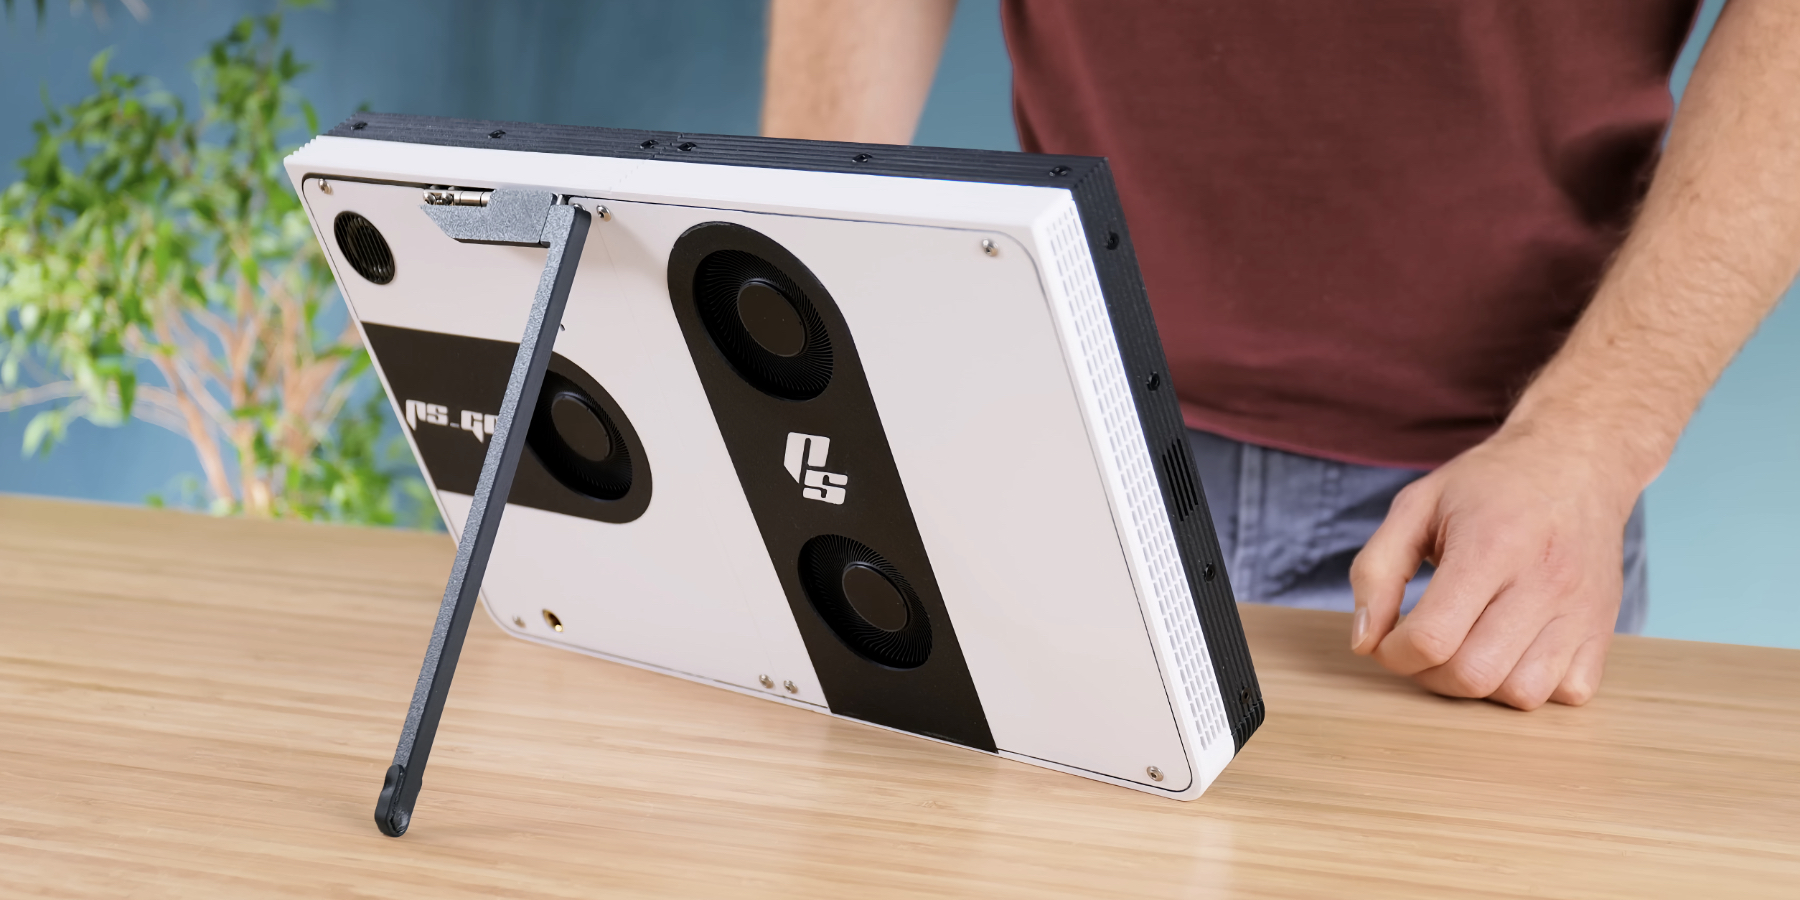 An enthusiast has assembled a portable PS5. It turned out to be a tablet with a stand